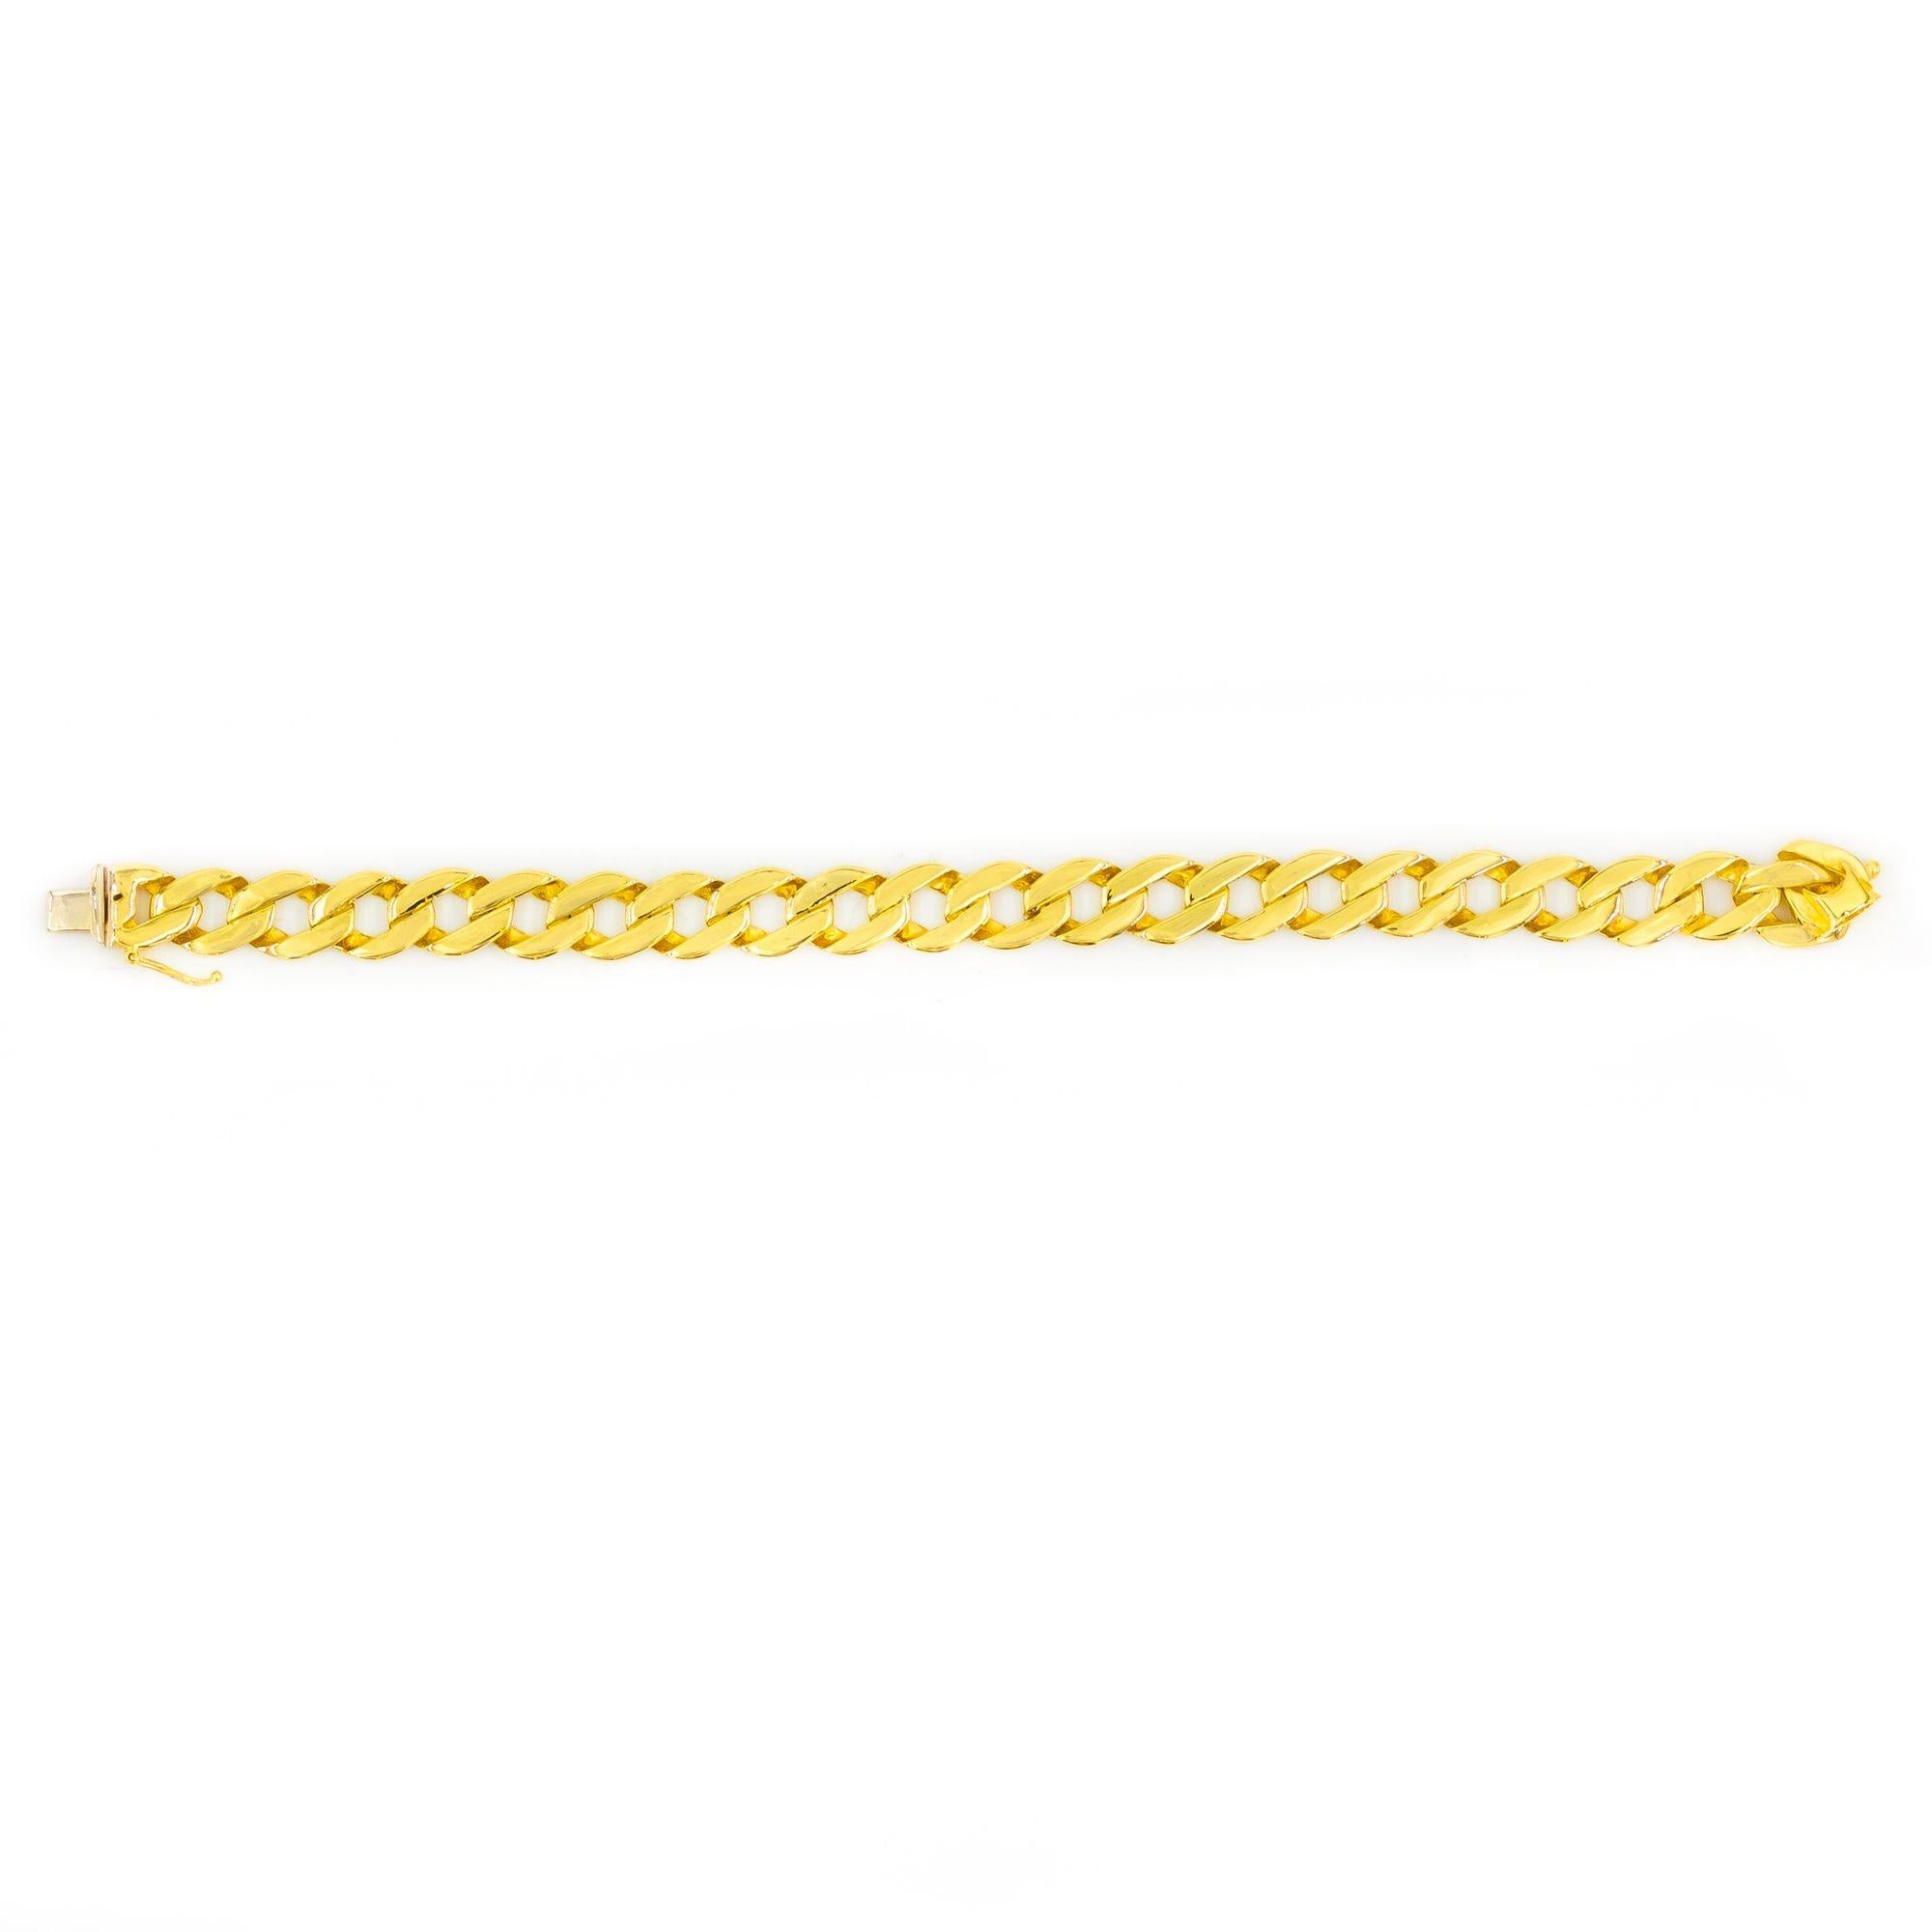 14K YELLOW GOLD CURB-LINK BRACELET
Marked 